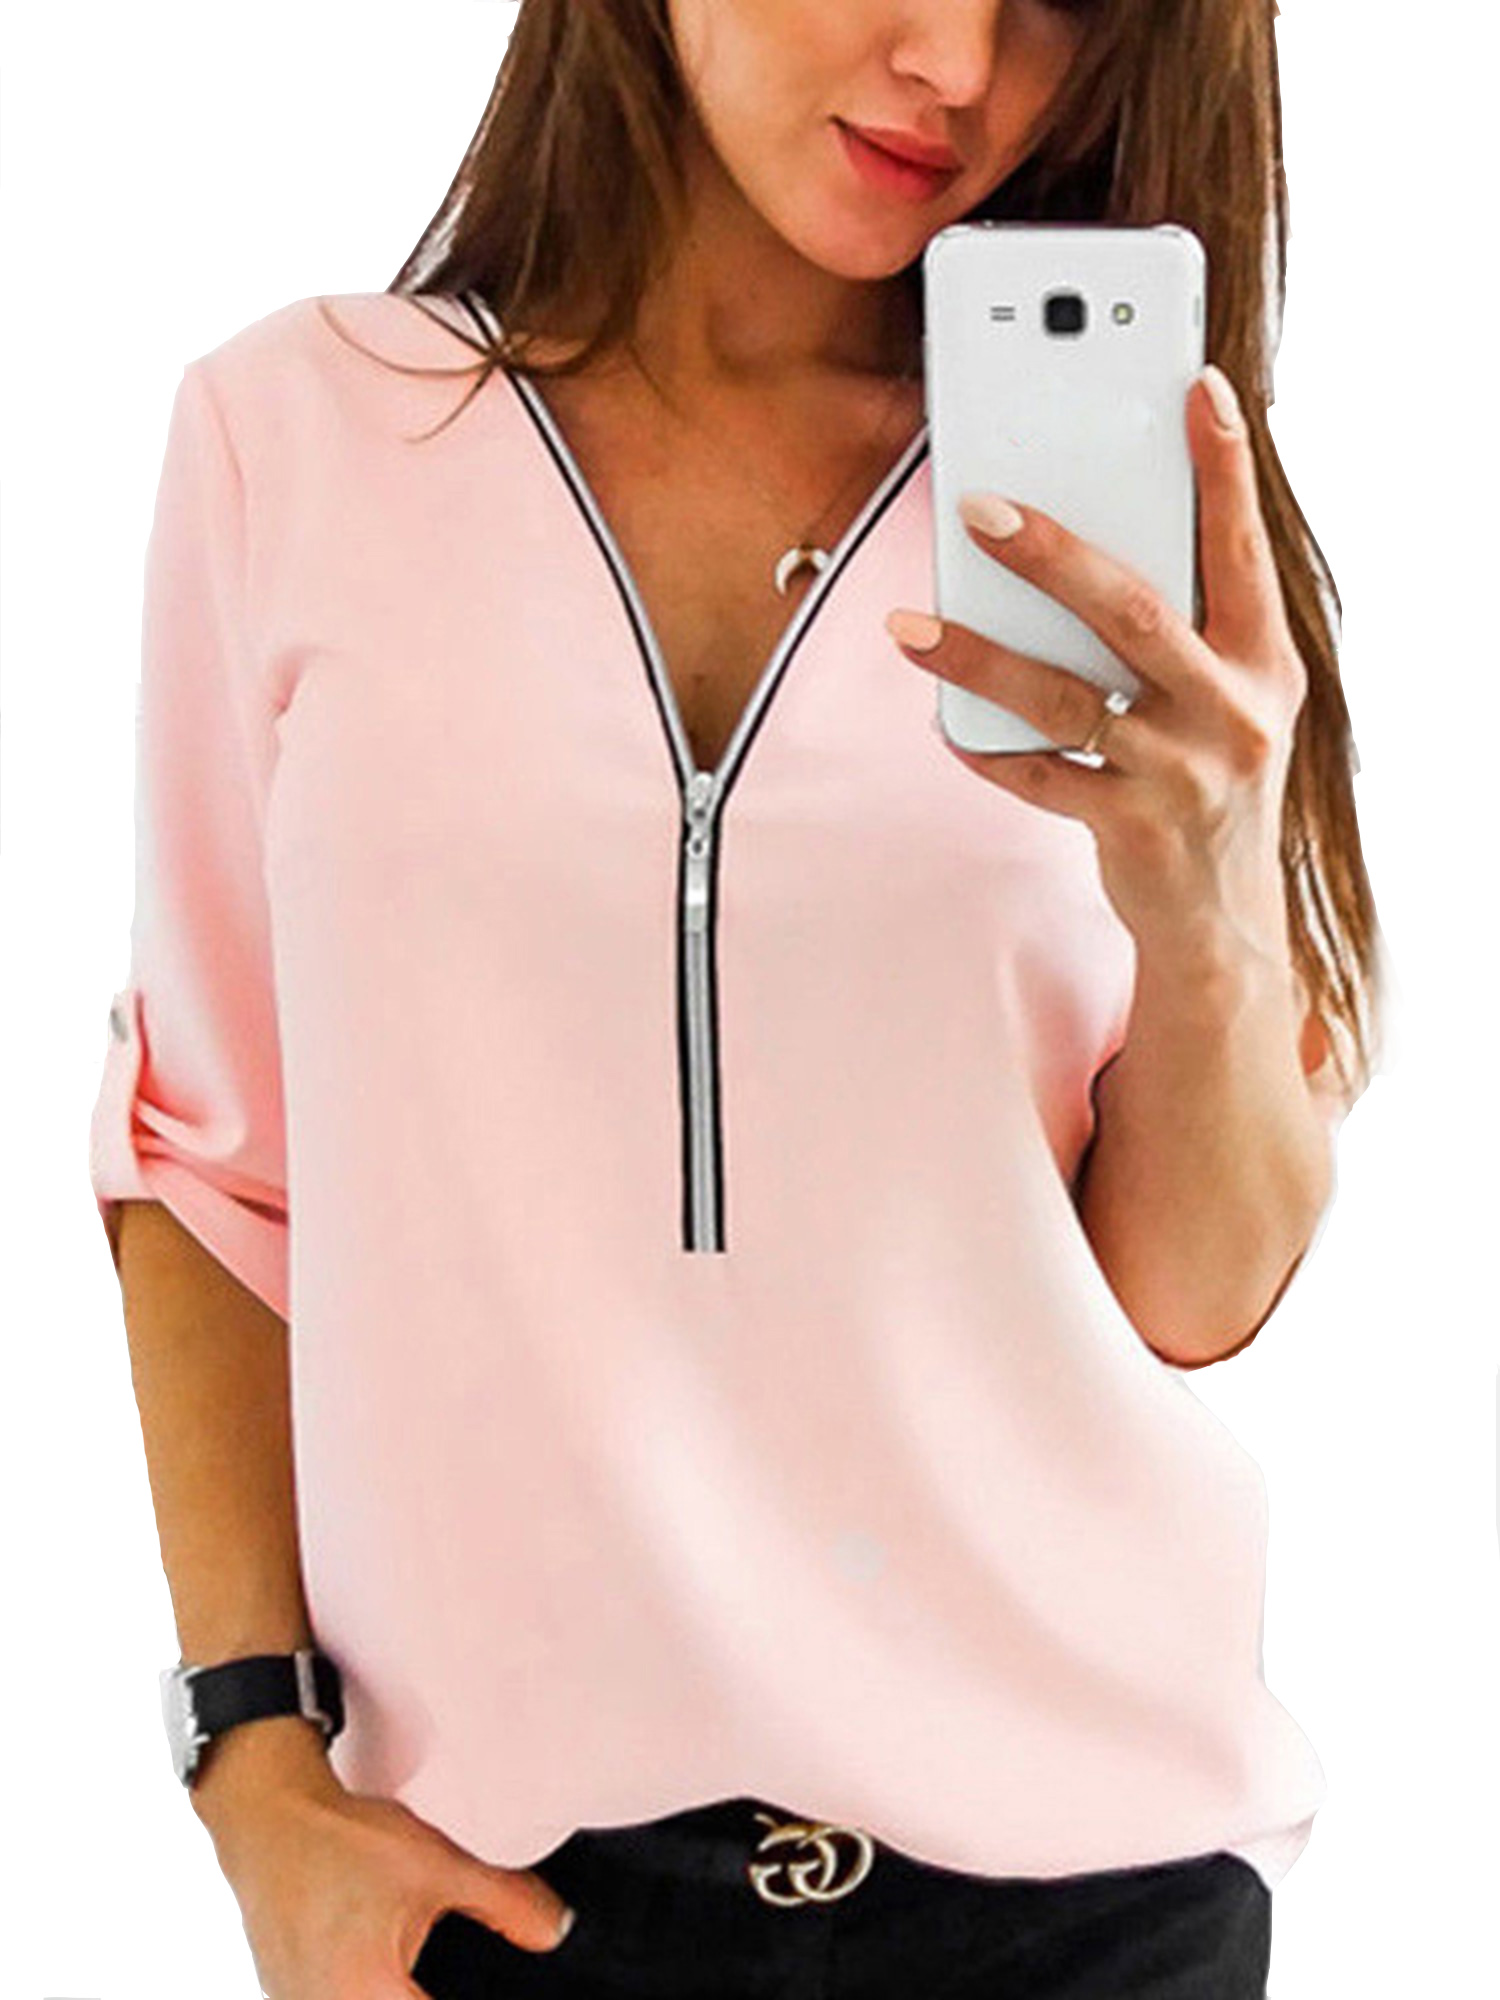 Women Casual Zip Neck Tops Shirt Ladies V Neck Zipper Loose T-Shirt Fashion Summer Blouse Roll-Up Long Sleeve Tee Top - image 1 of 2